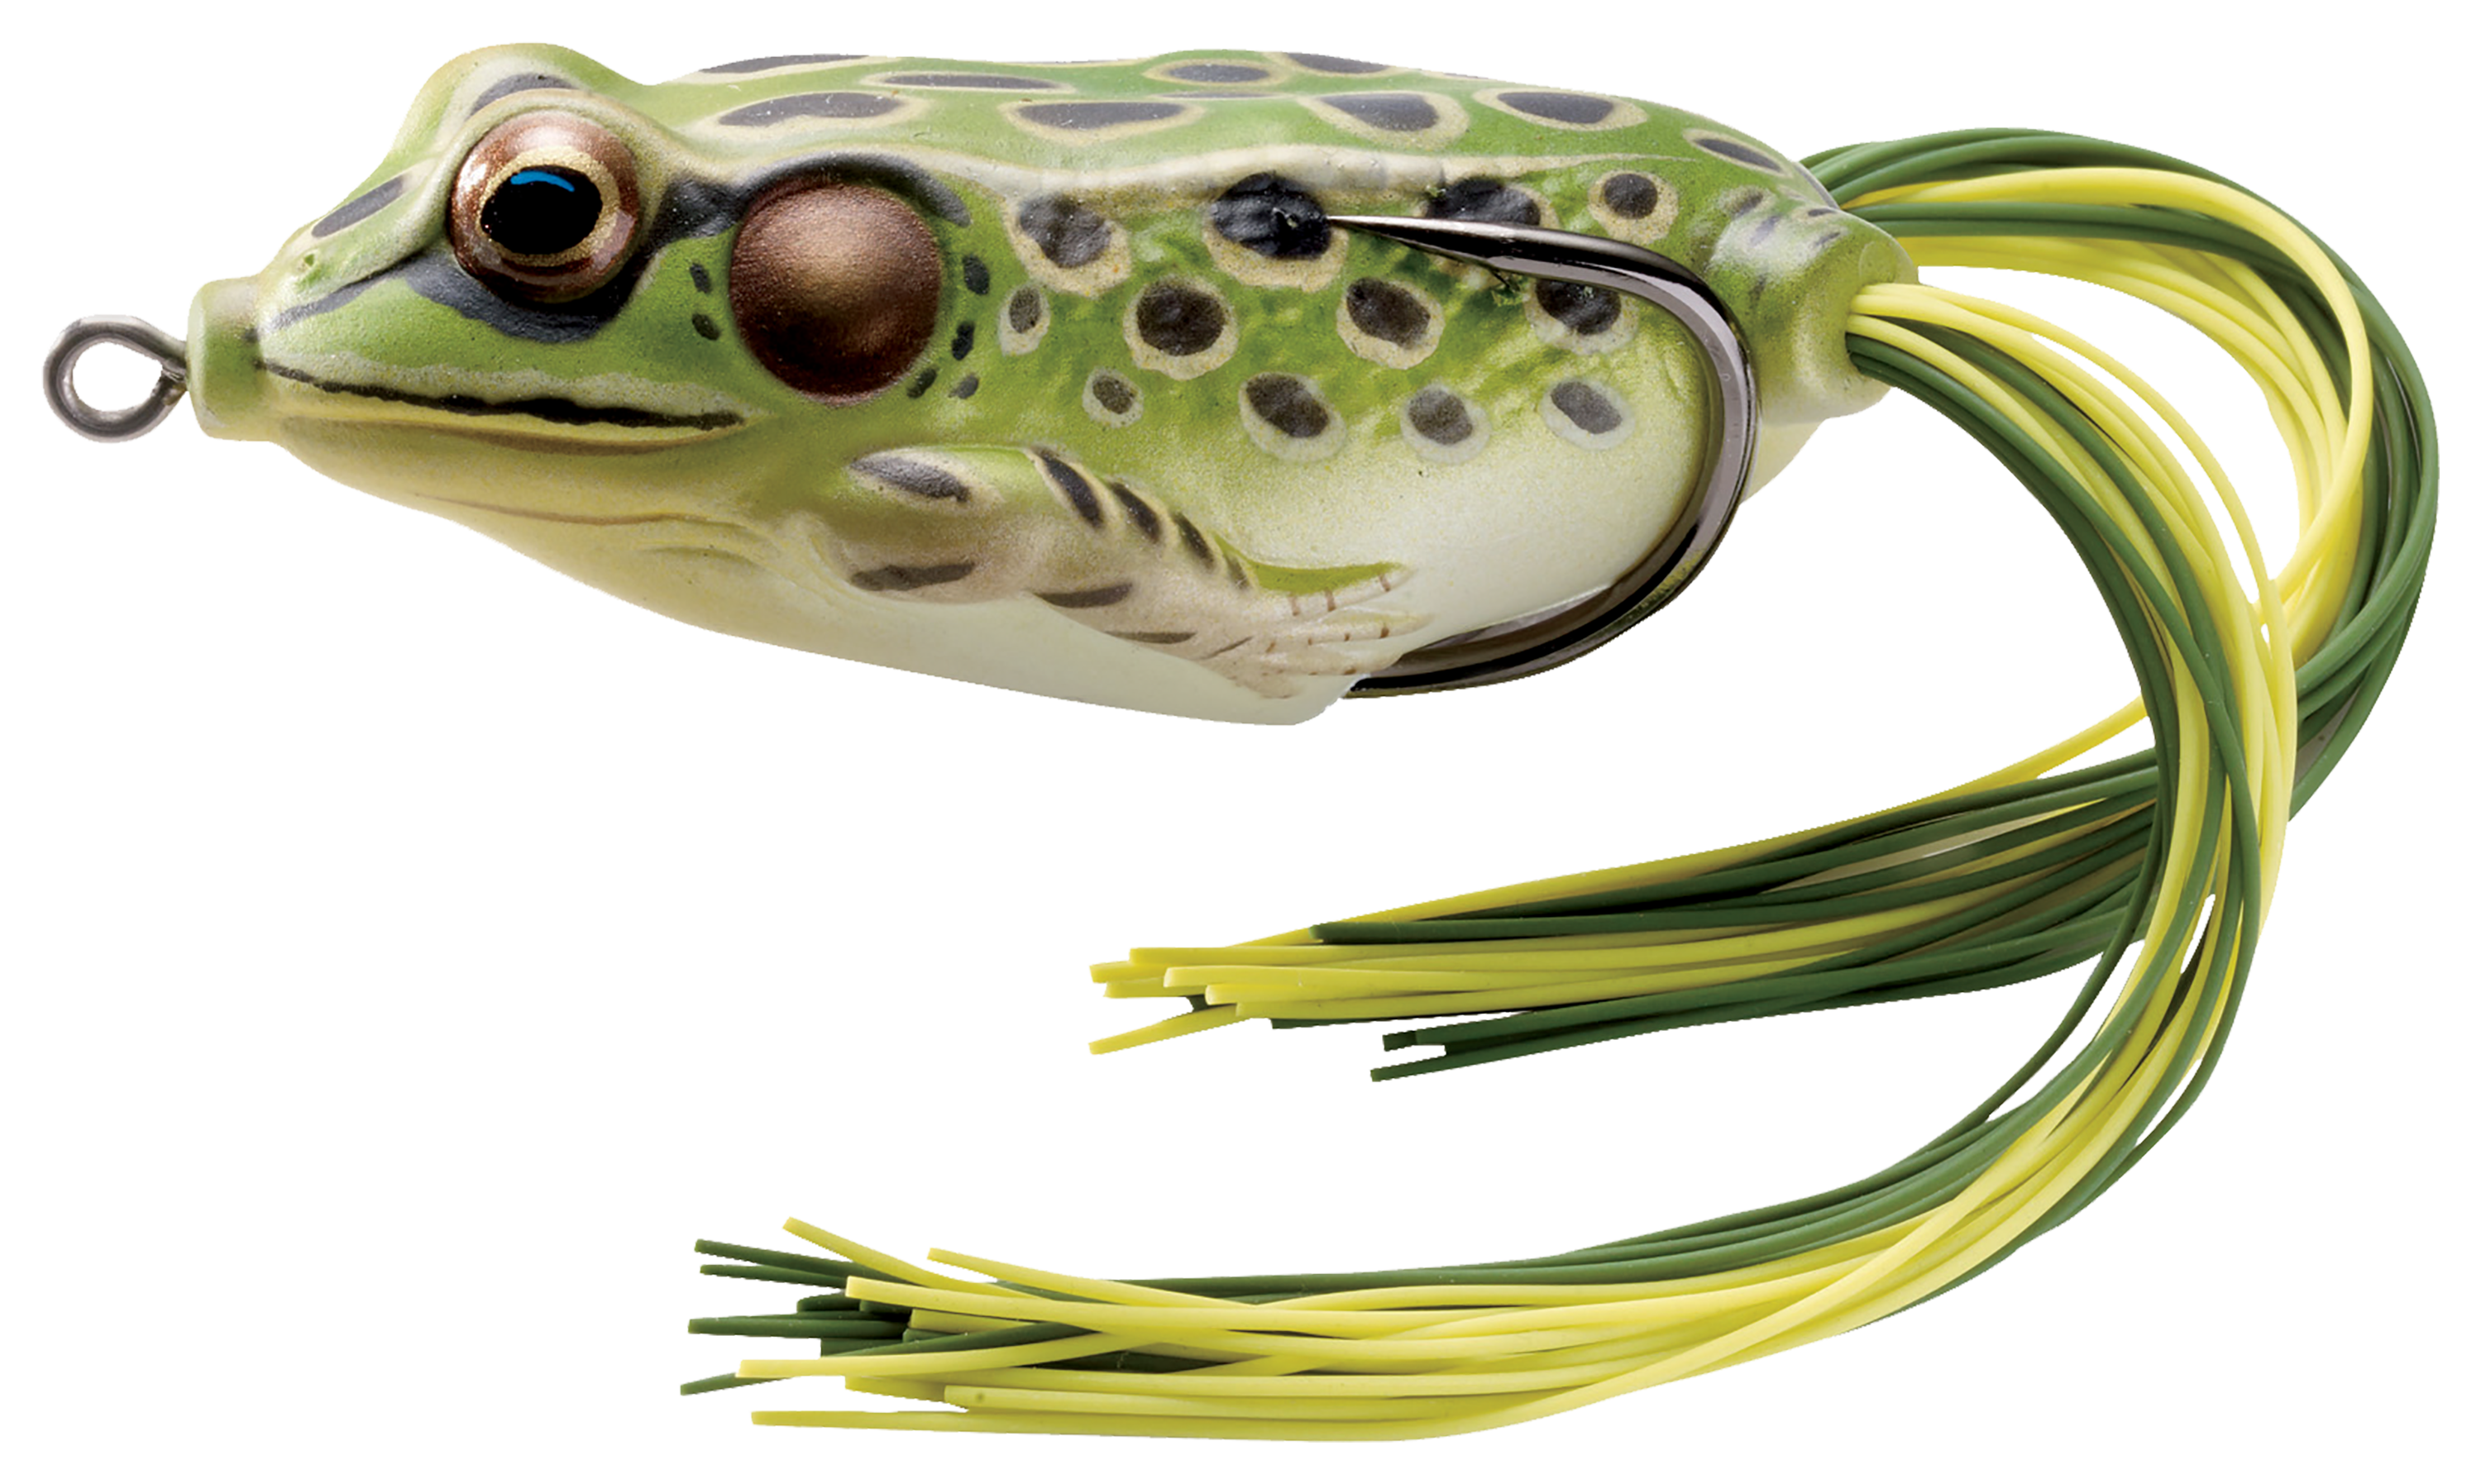 Cheap Topwater Frog Lures Soft Fishing Lure Kit for Bass Pike